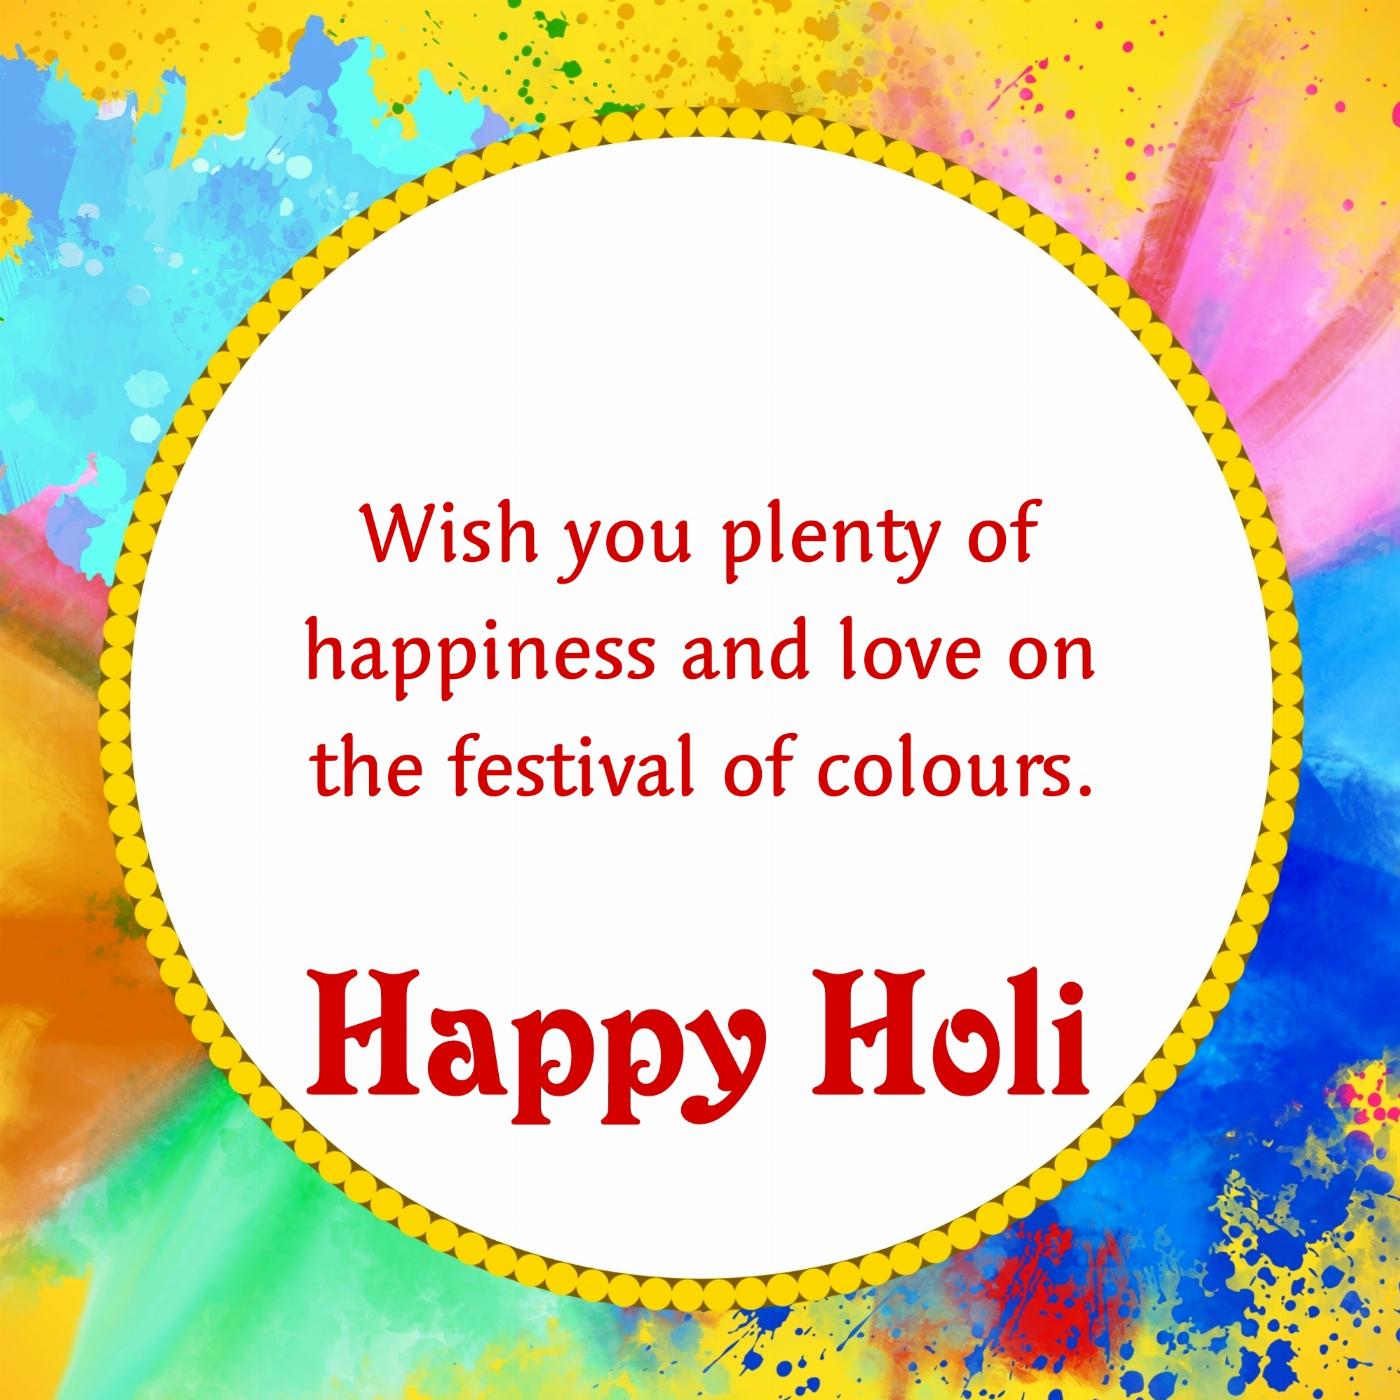 Wish you plenty of happiness and love on the festival of colours